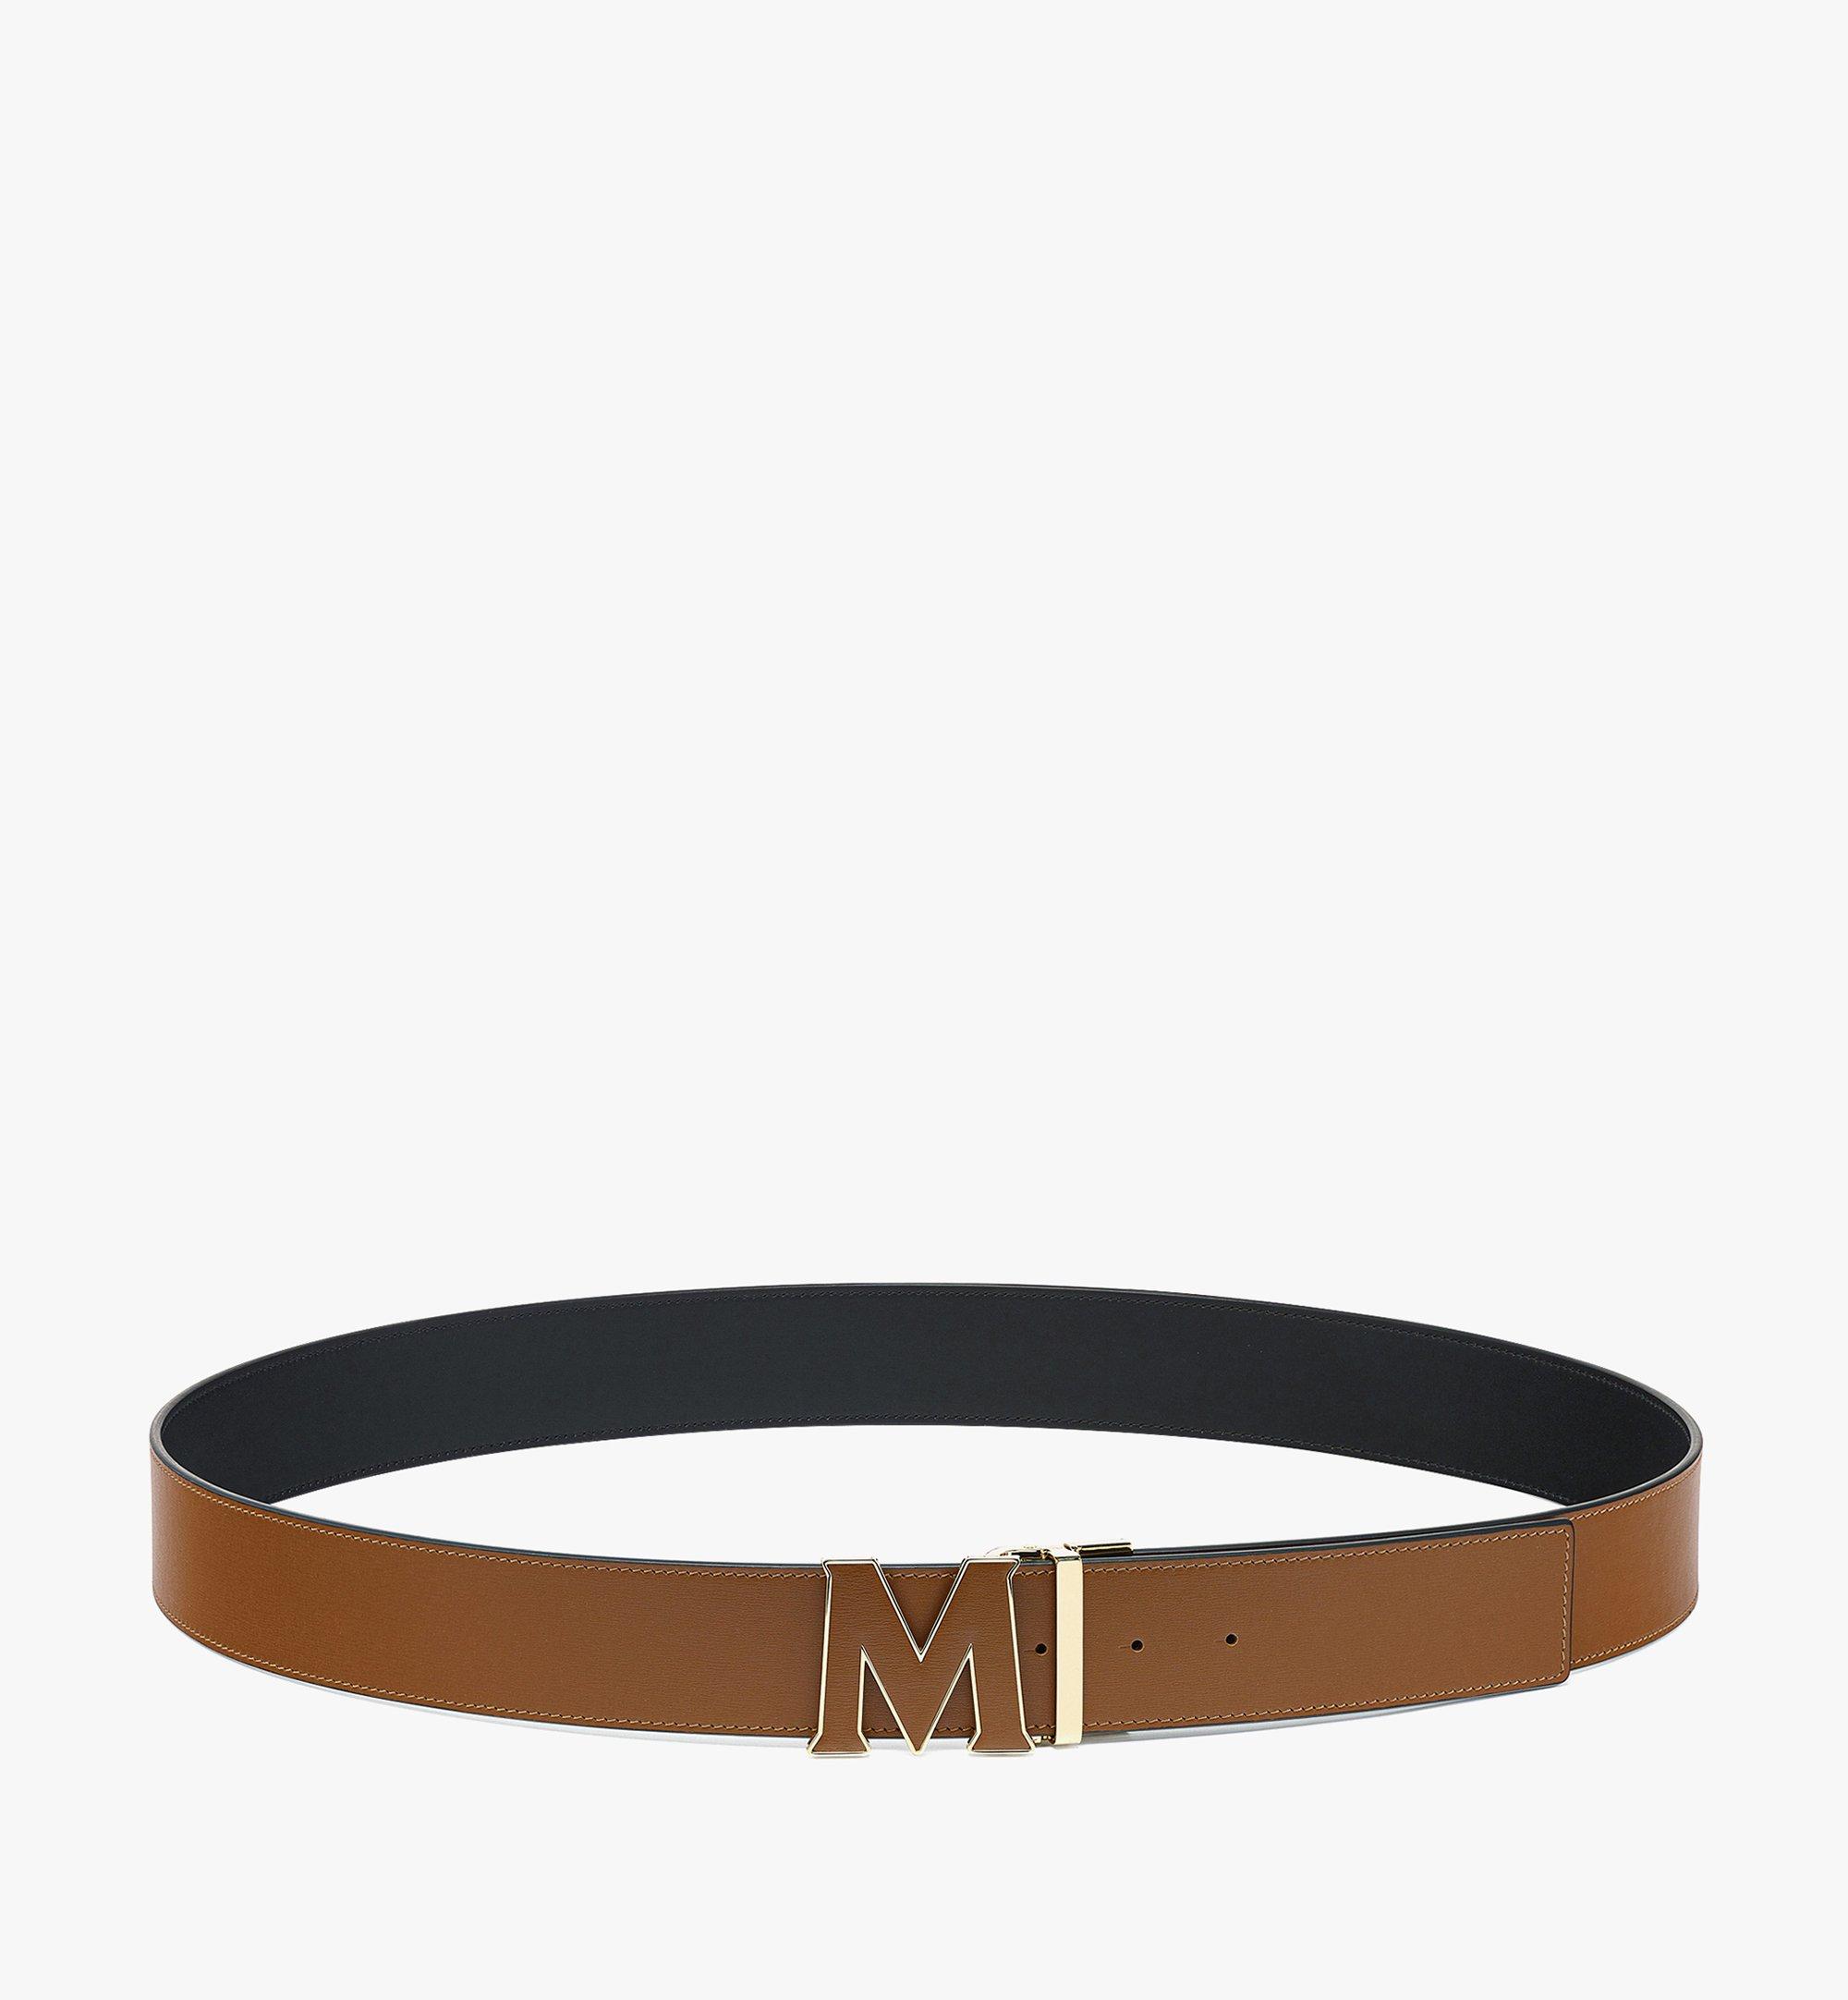 MCM Claus Leather Inlay M Reversible Belt 1.75” in Embossed Leather Brown MXBCSVI01N7001 Alternate View 2